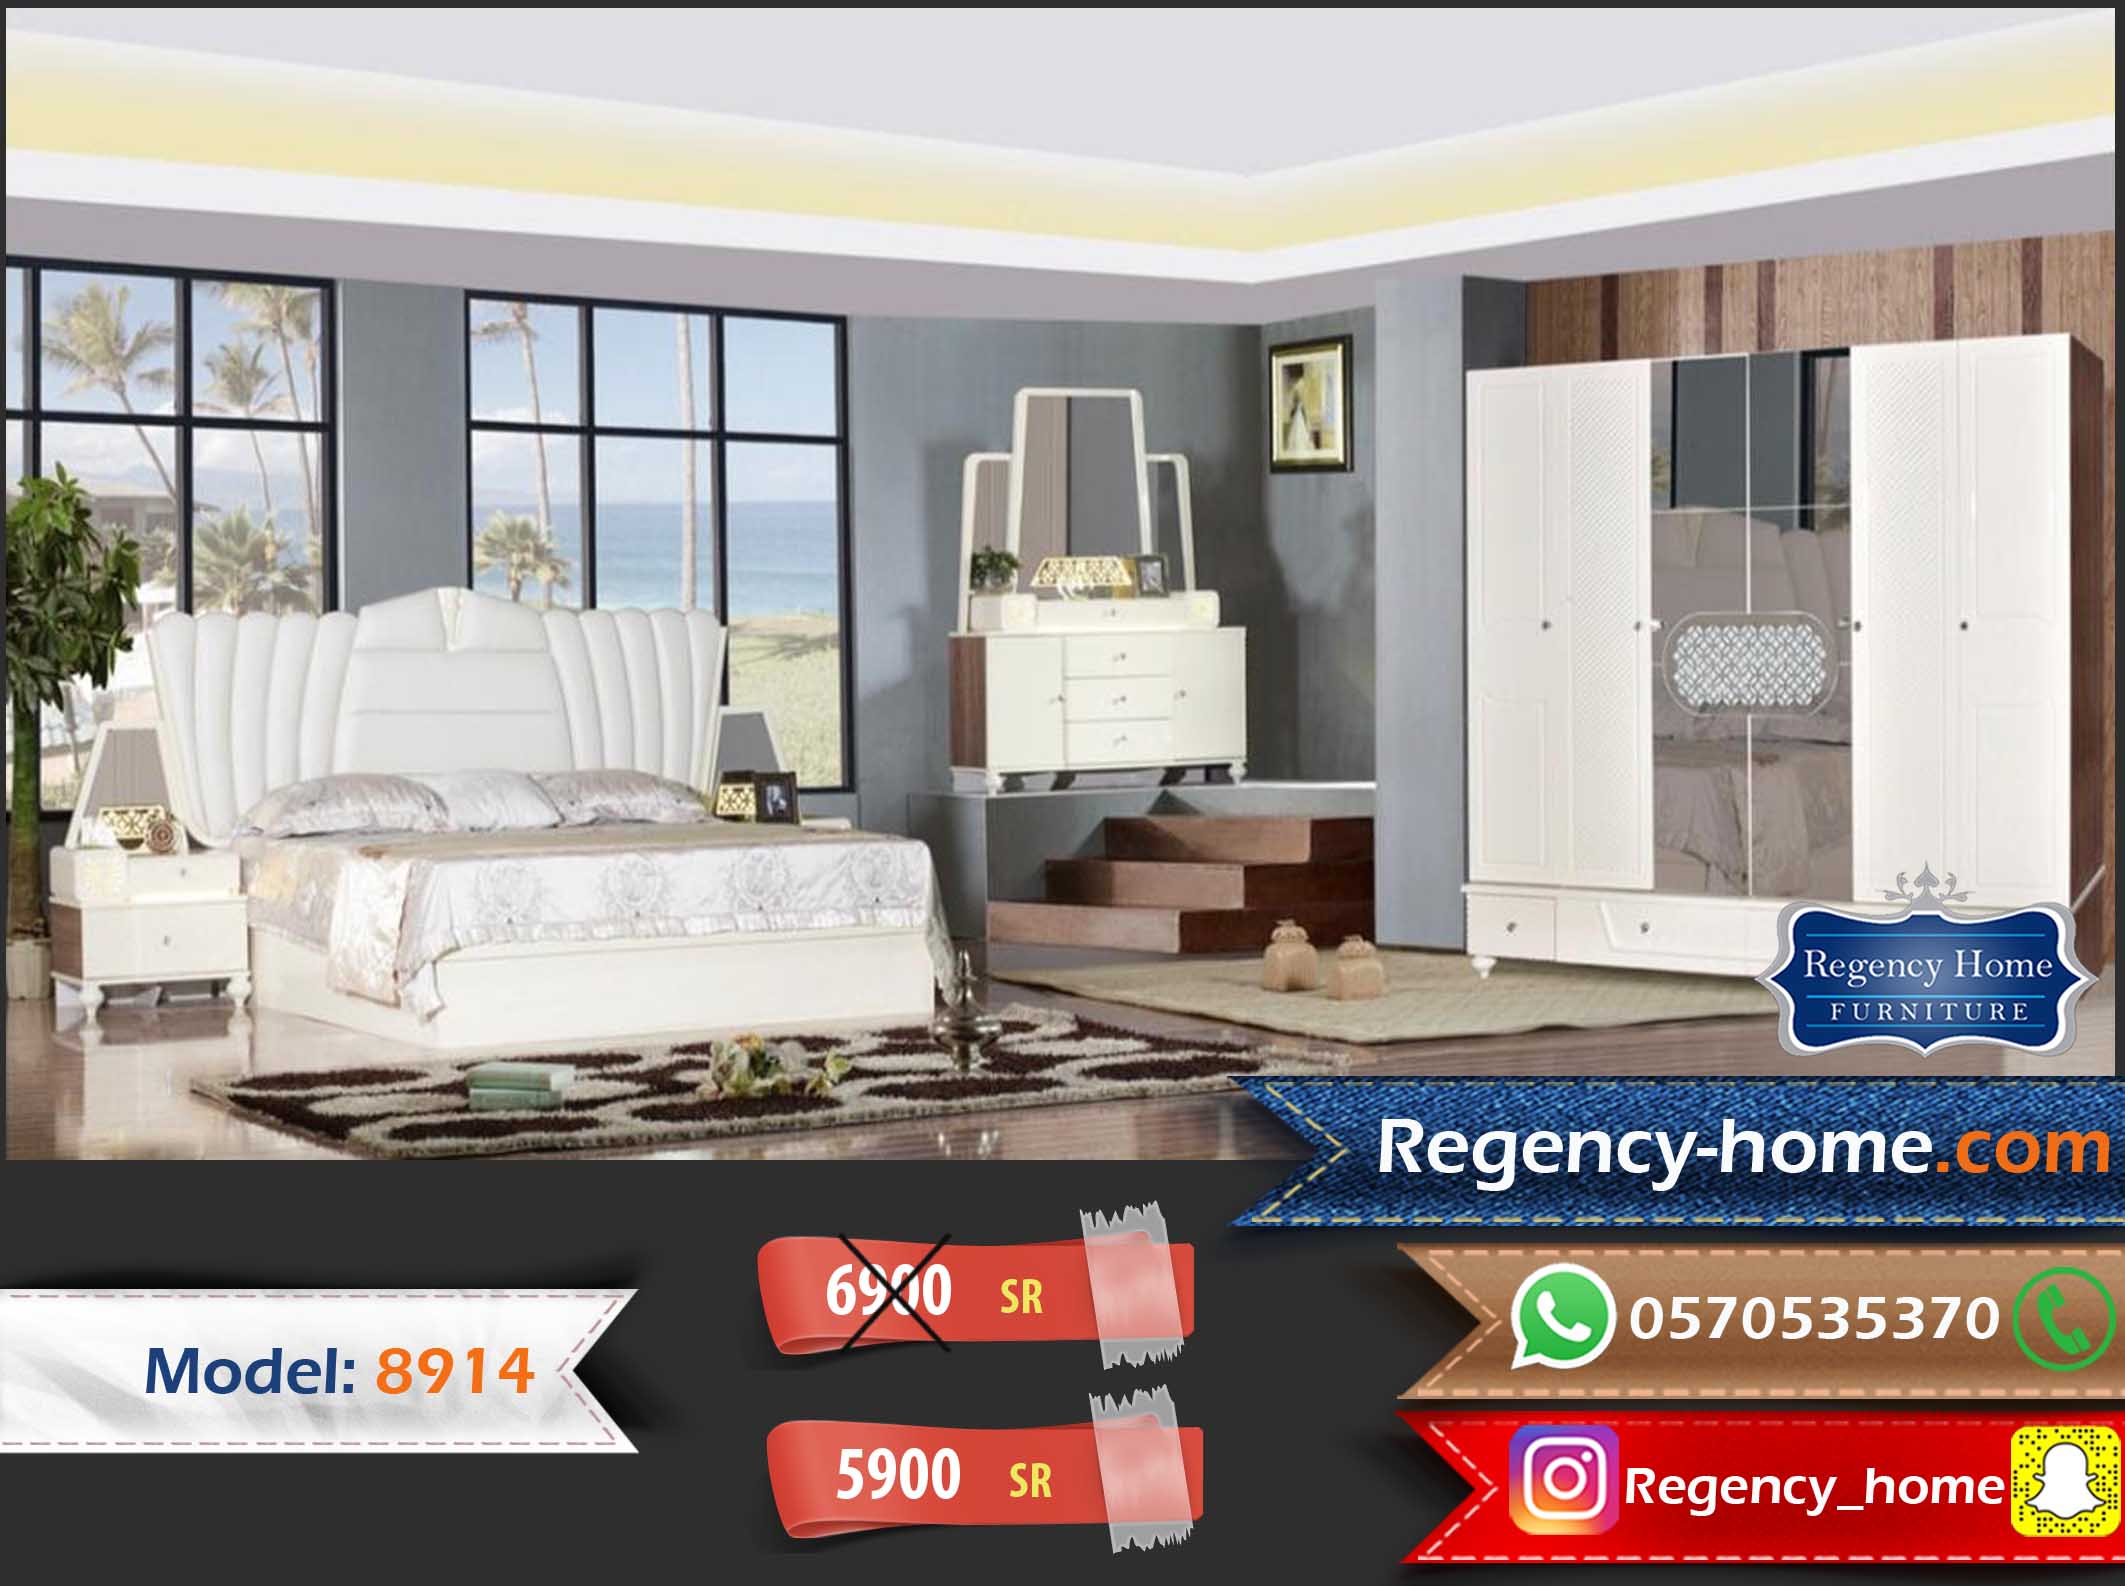 New bedrooms with 5900 Just